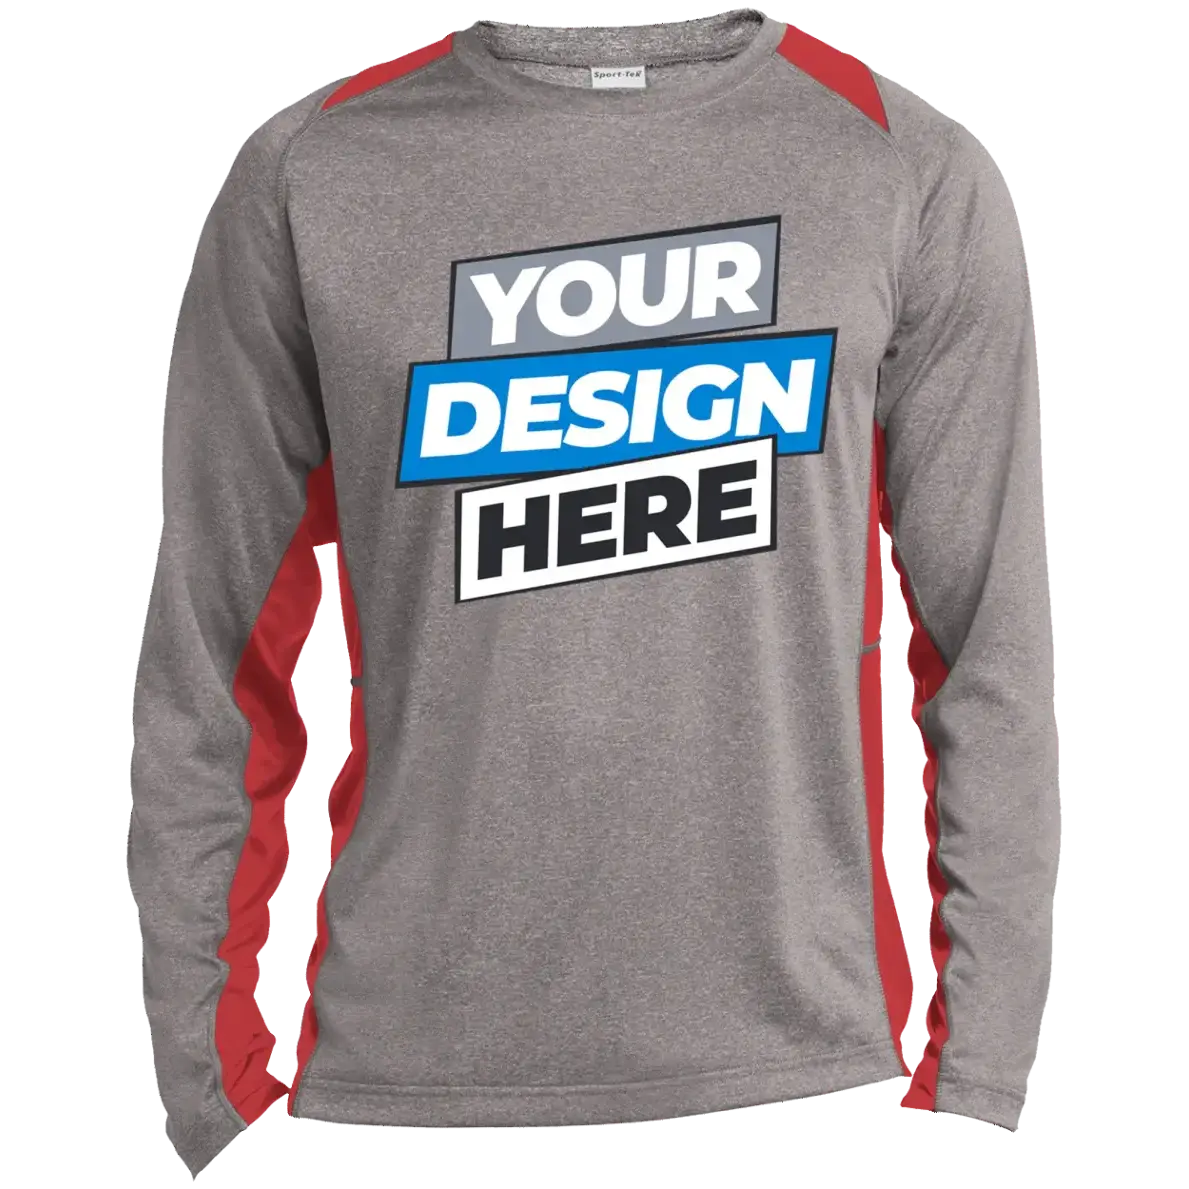 DEMO Long Sleeve Tees (Men's and Women's Choices)